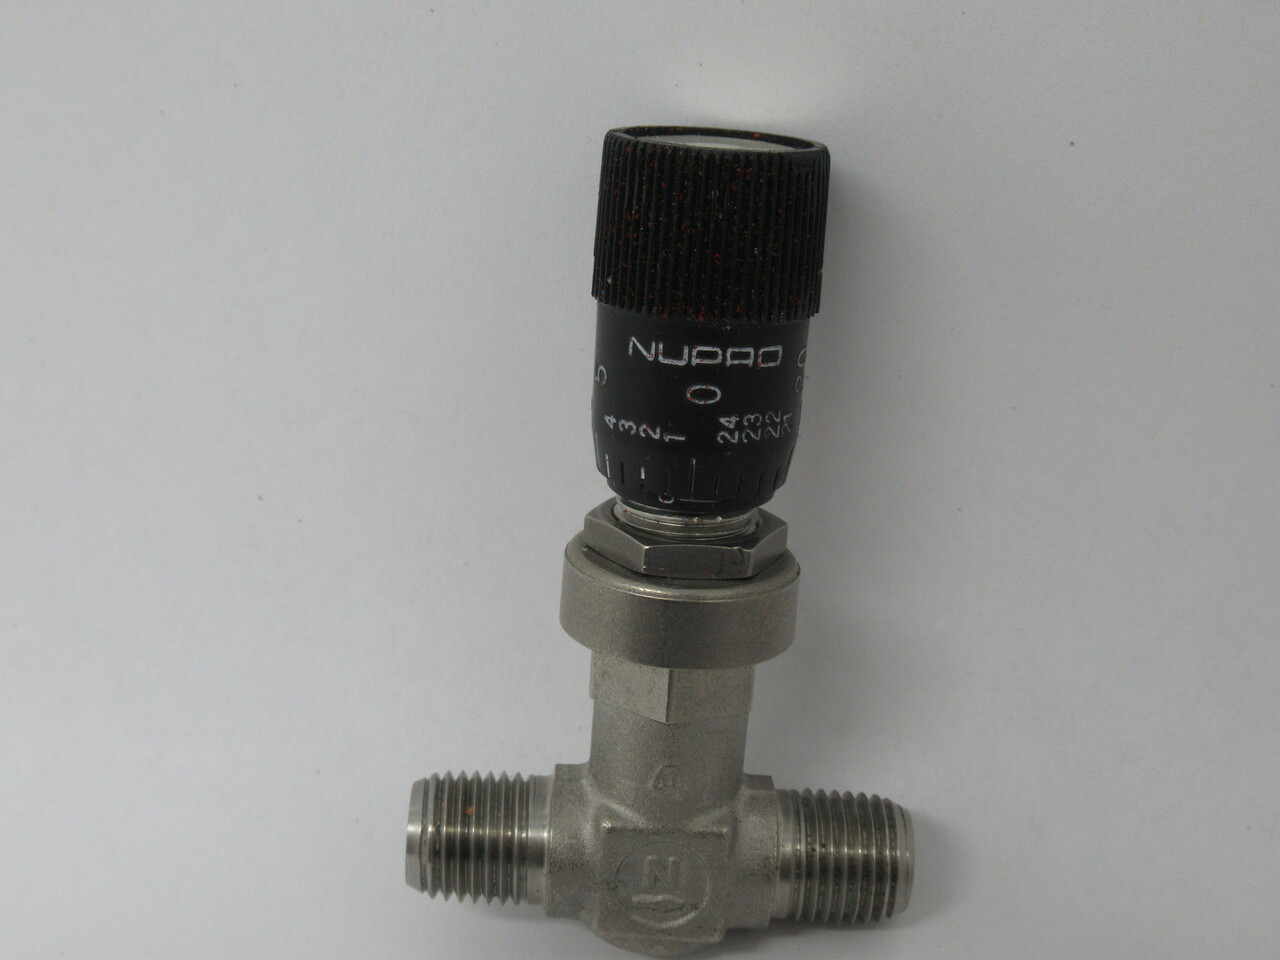 Nupro 26312 Gas Metering Valve Straight Male to Male 1/4" NPT USED